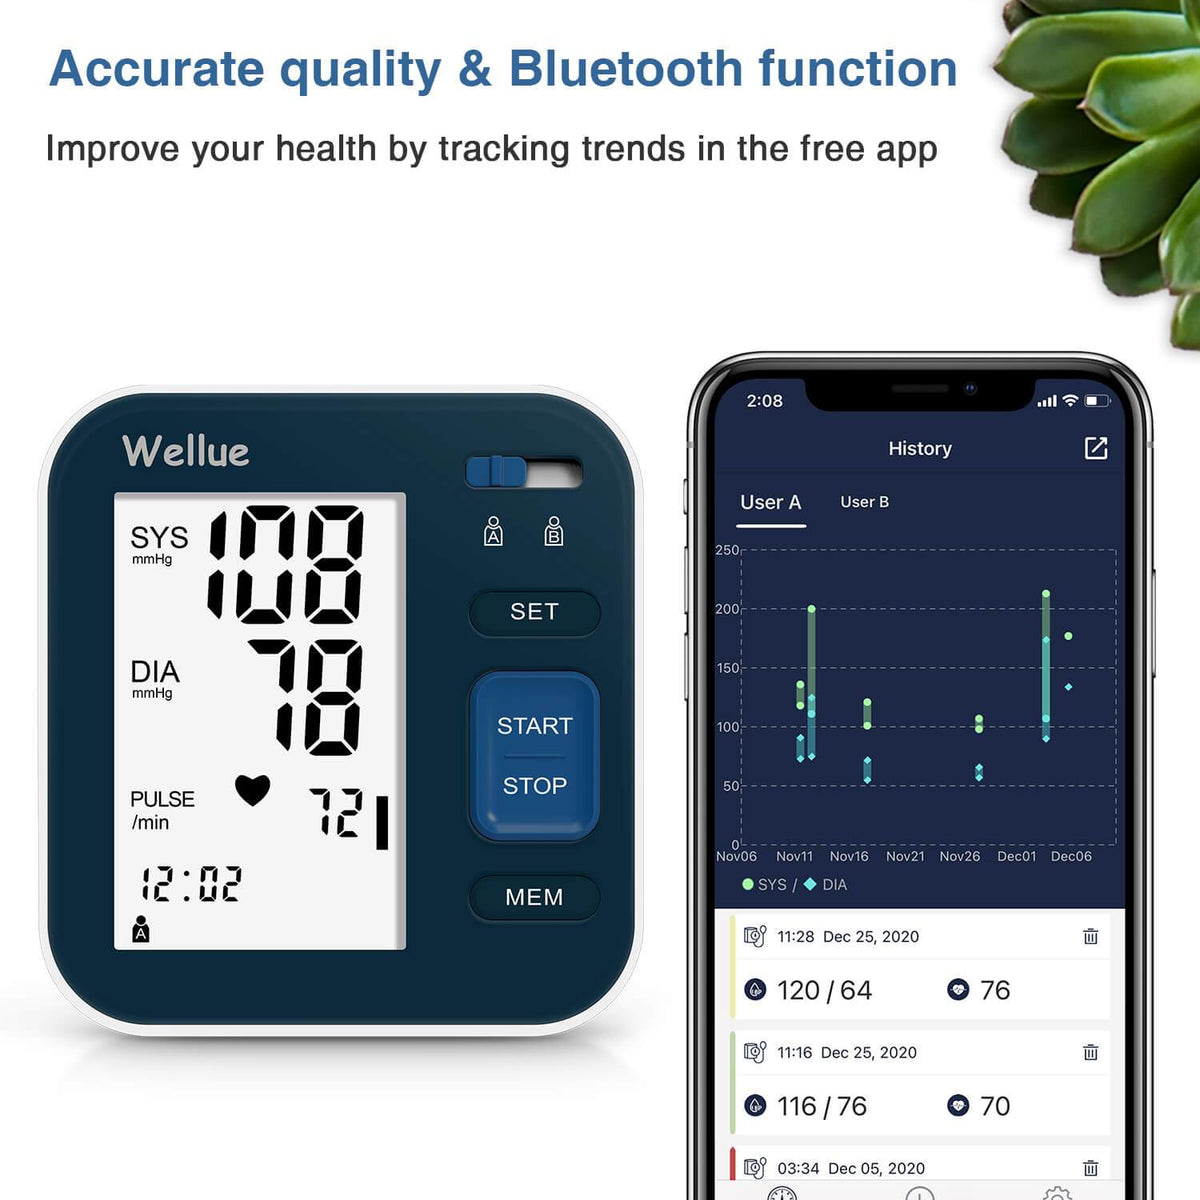  Wellue Blood Pressure Monitor for Home Use, Bluetooth Smart Blood  Pressure Machine Upper Arm Cuff, Portable Wireless Automatic BP Monitor,  USB Rechargeable Battery, Free APP for iOS & Android, BP2A 